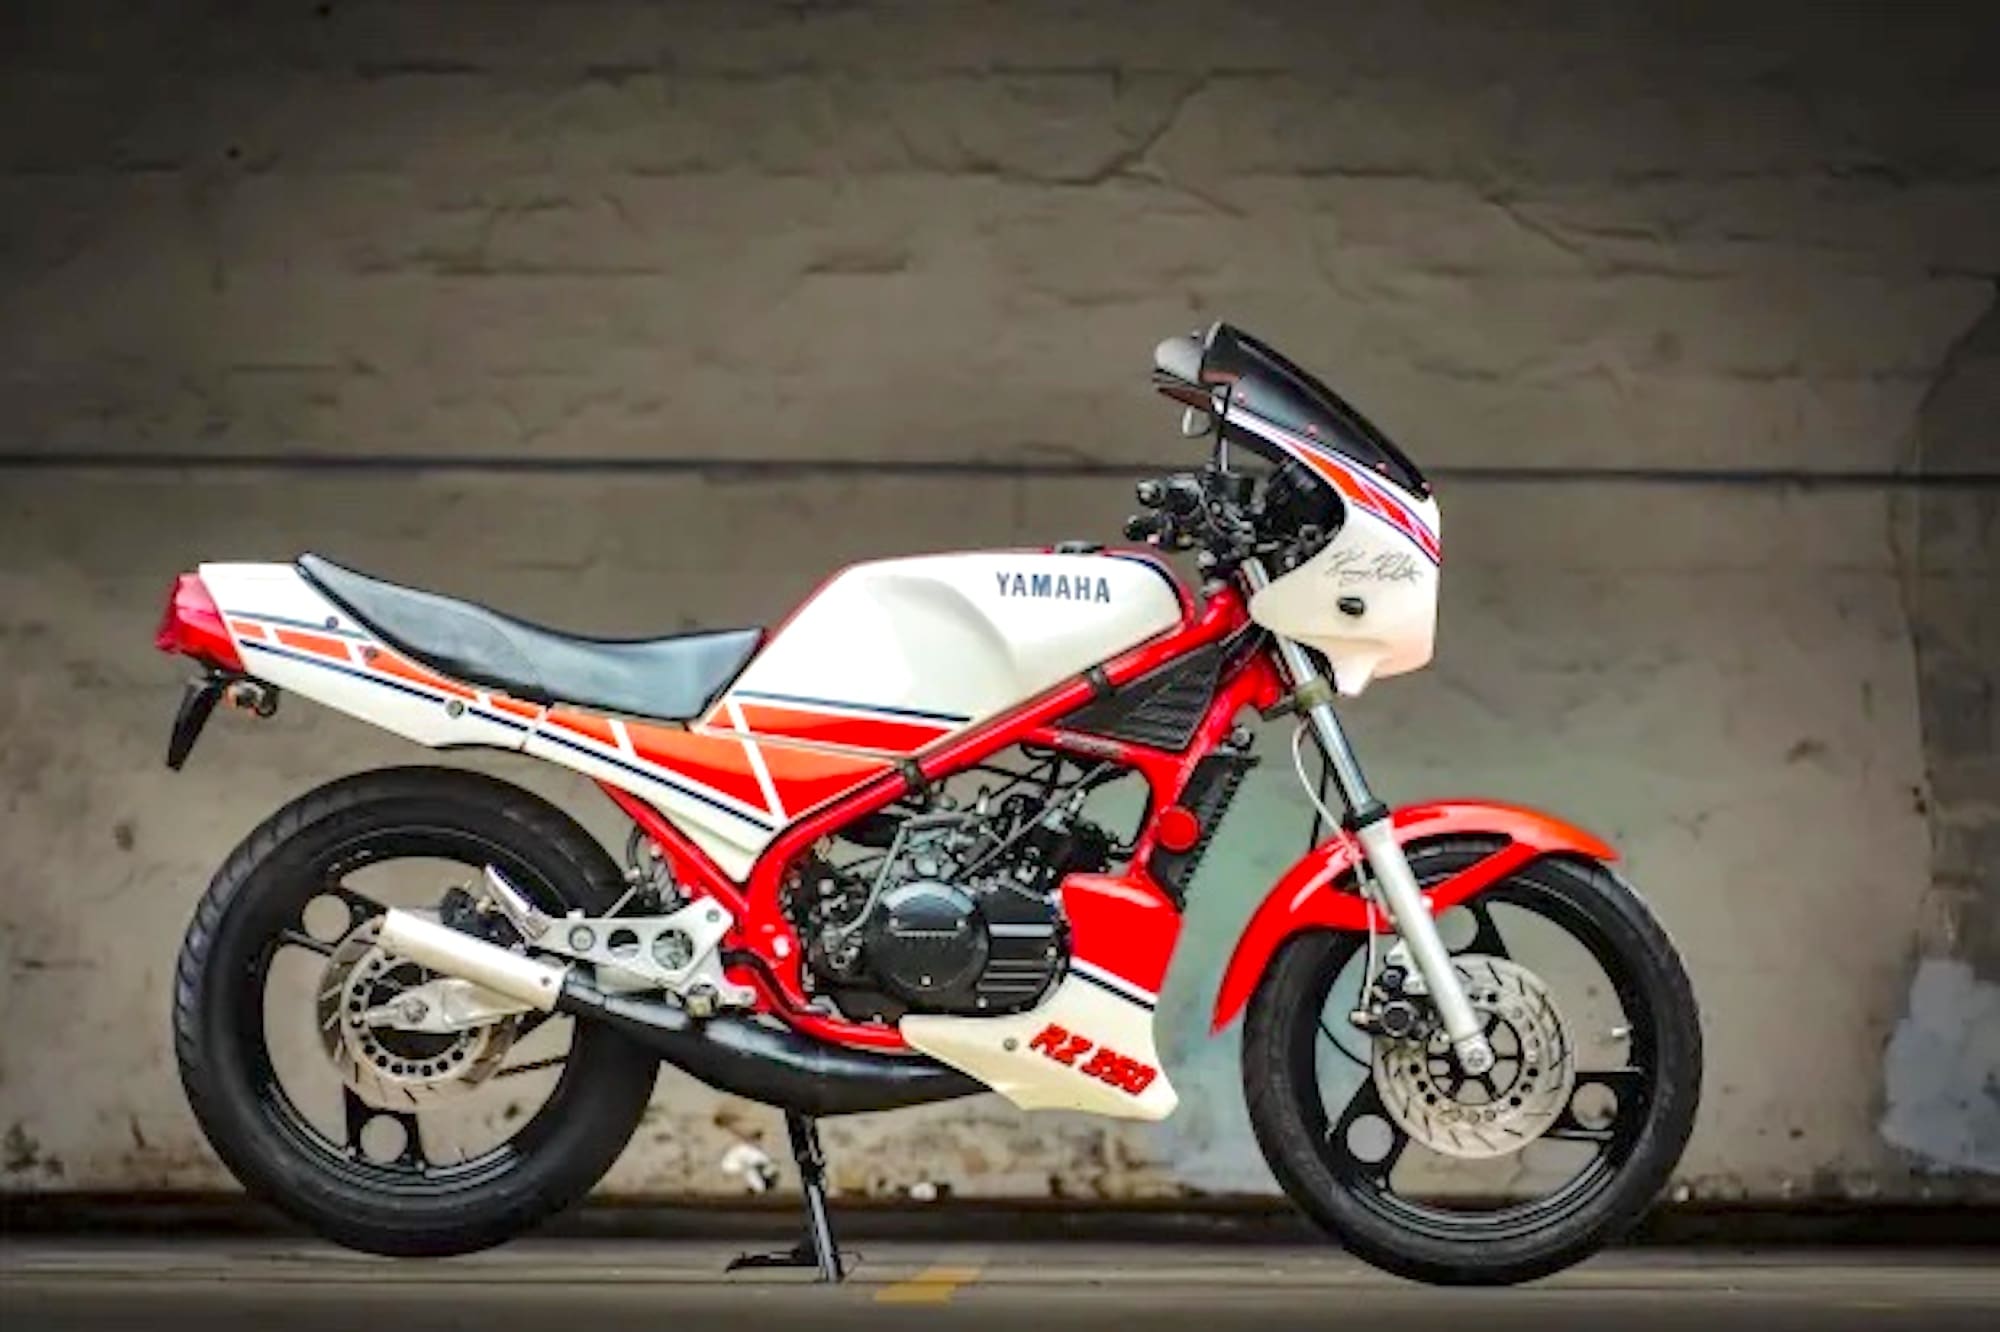 A 1985 Yamaha RZ350 Kenny Roberts Edition from Bring A Trailer Auctions. Media sourced from BAT.